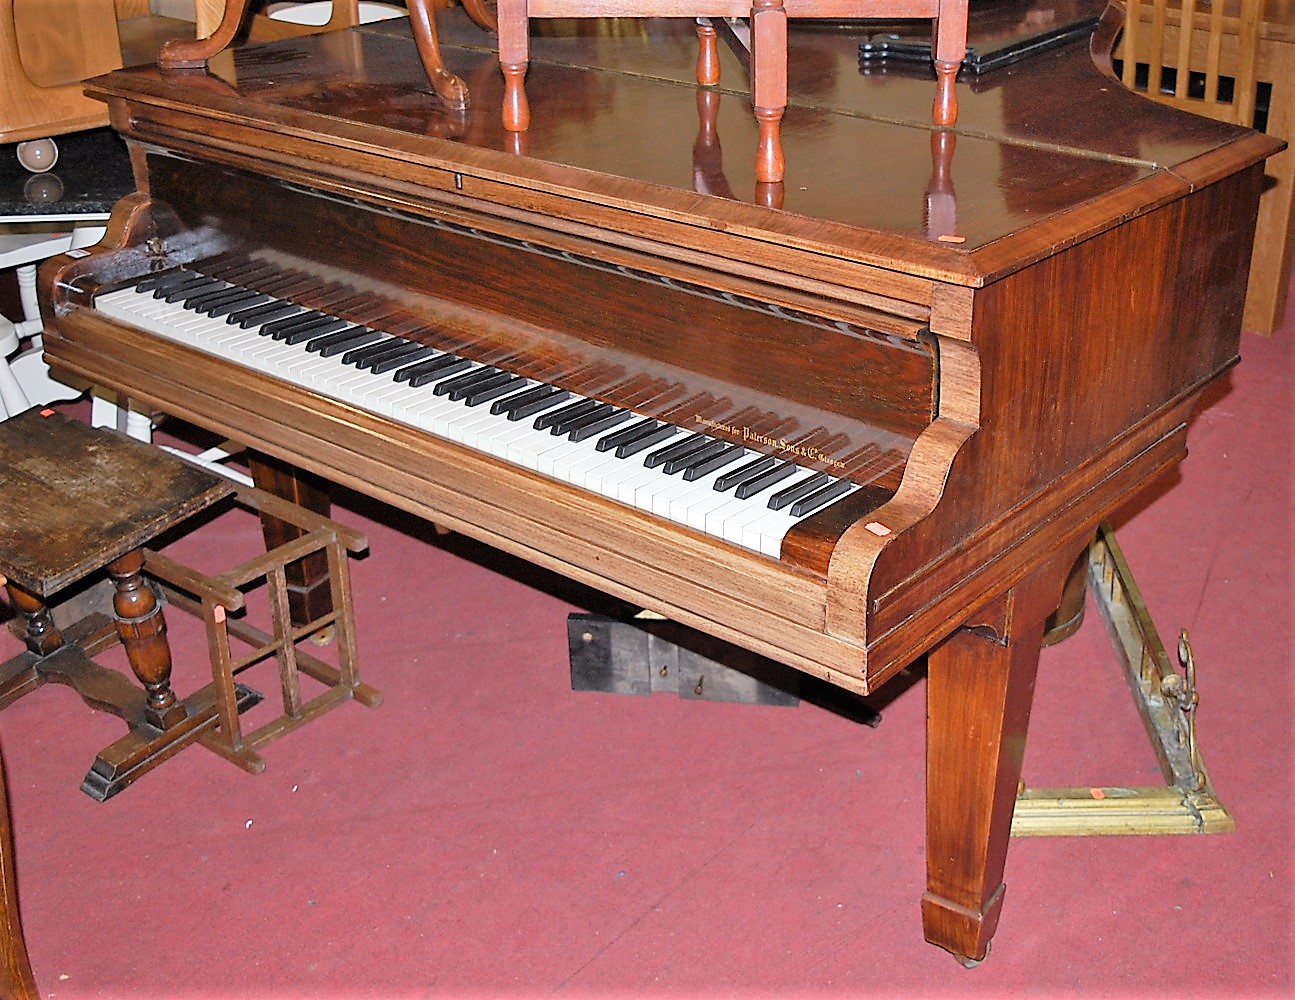 An early 20th century rosewood cased baby grand piano by Collard & Collard, iron-framed and over-